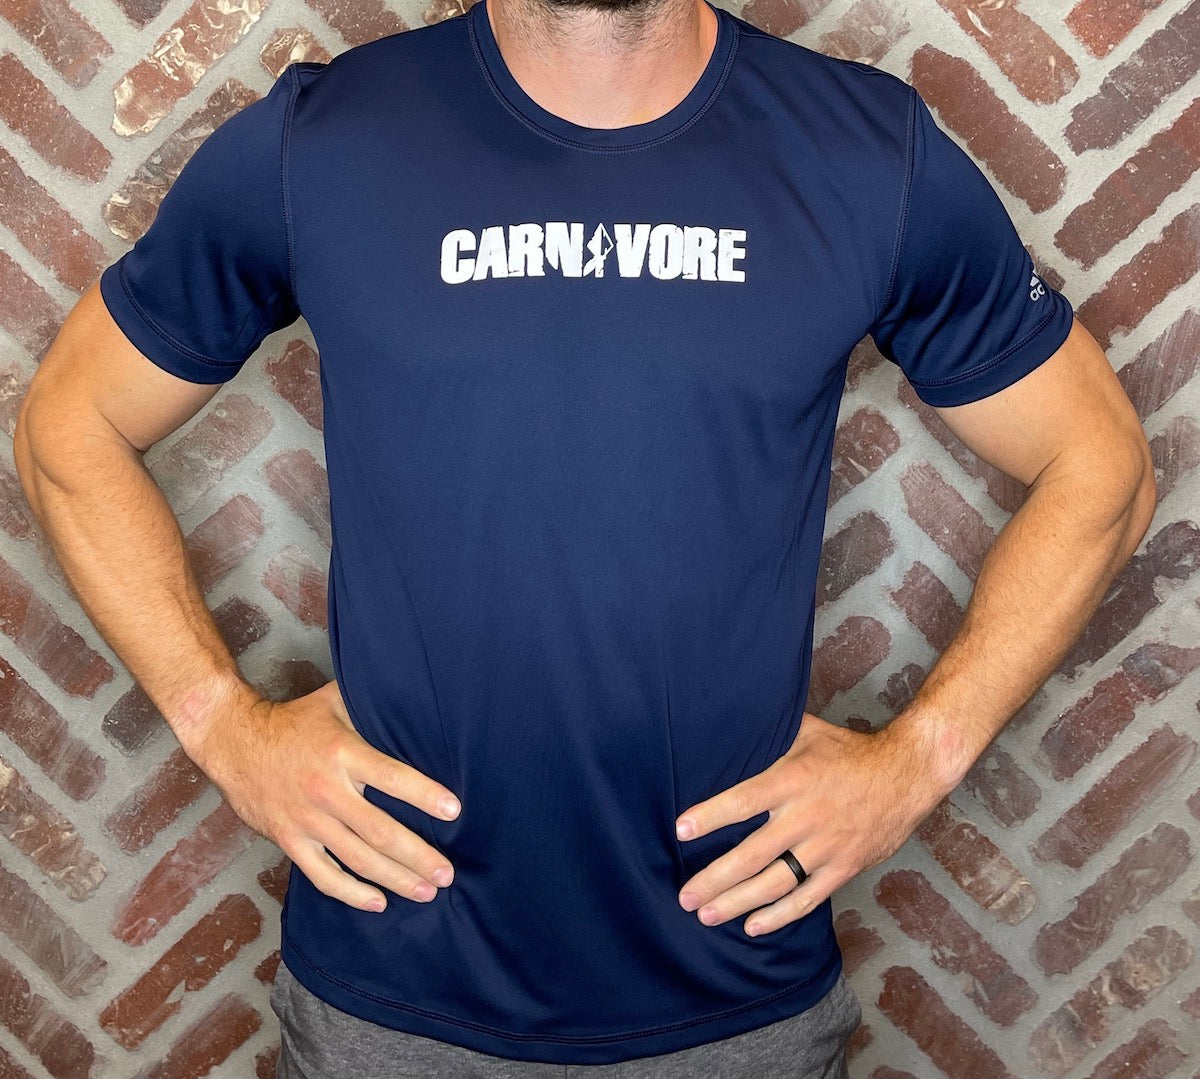 MK Supplements CARNIVORE T-Shirt in Blue.